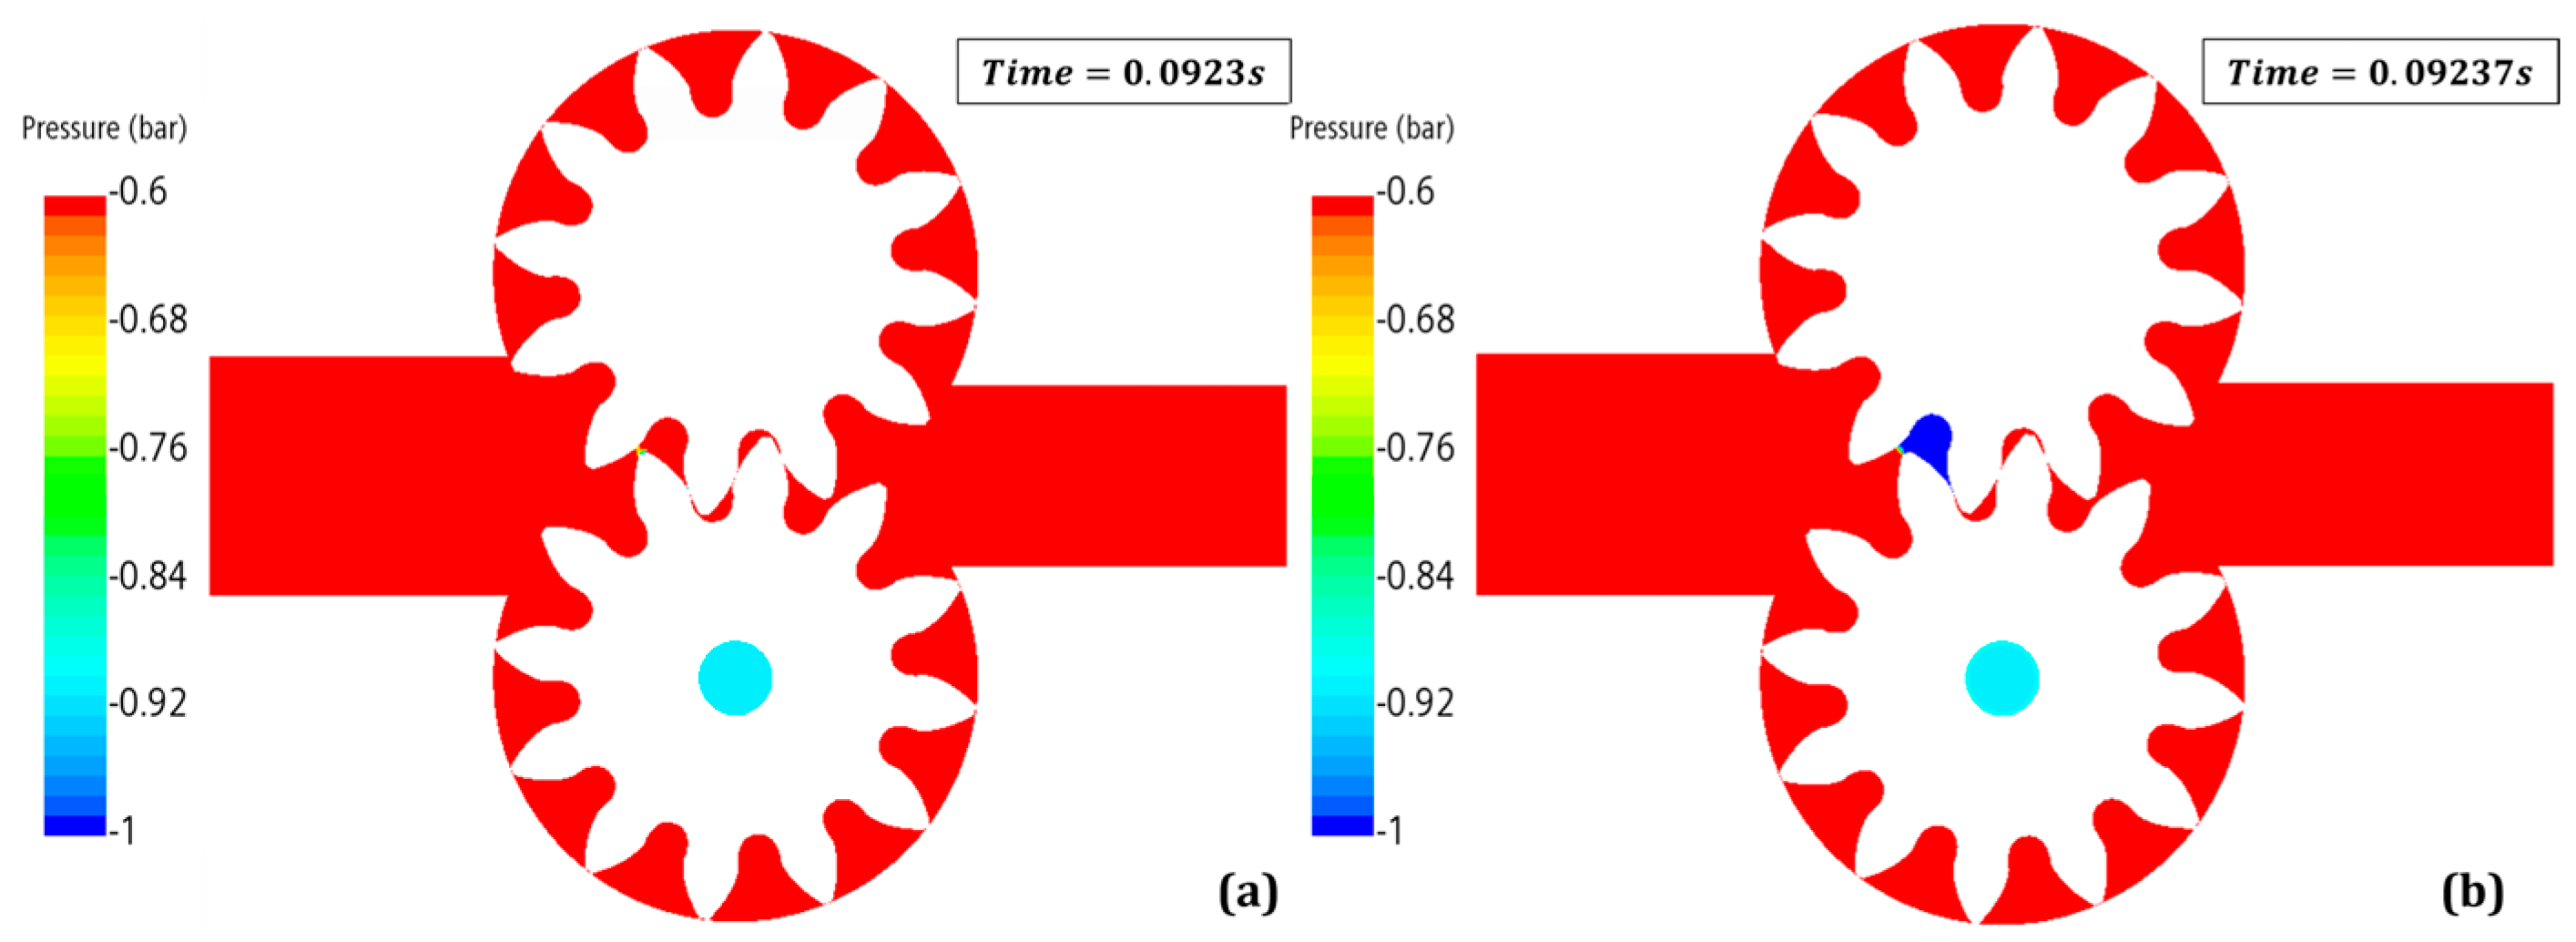 Fluids | Free Full-Text | Development of a Numerical Approach for the CFD  Simulation of a Gear Pump under Actual Operating Conditions